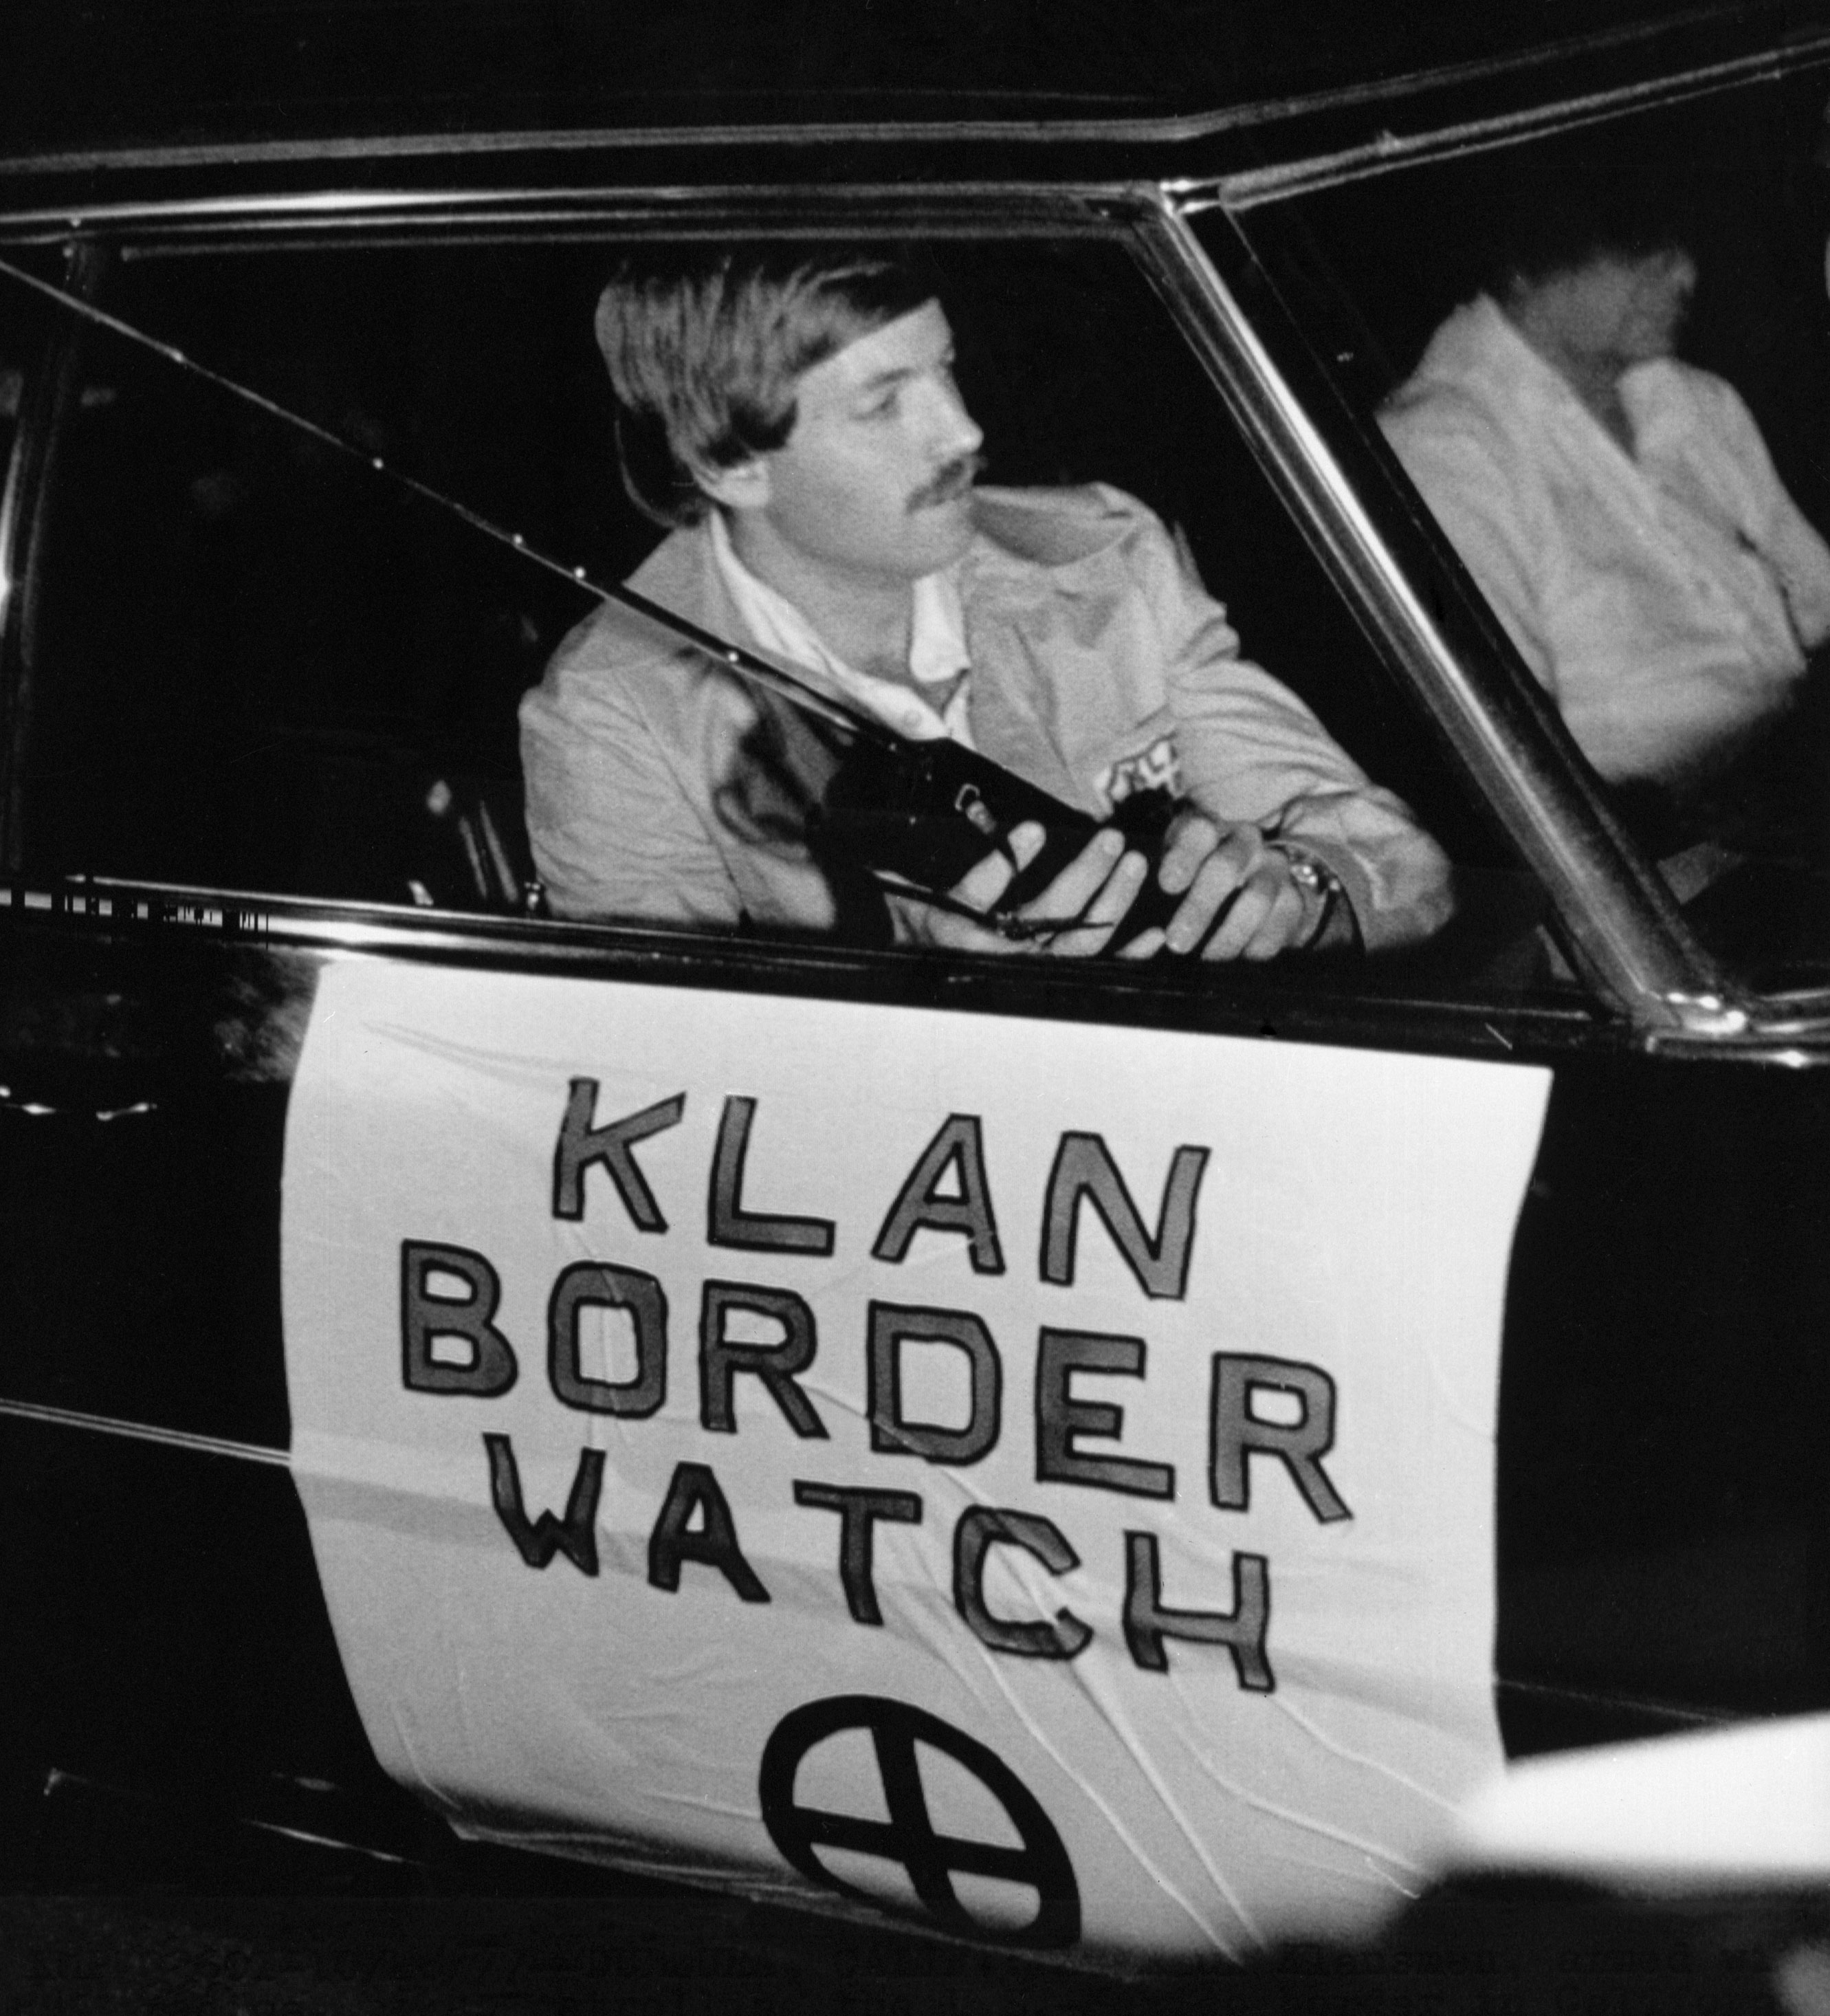 David Duke, then-leader of the Ku Klux Klan, patrols the California-Mexico border for immigrants in a 'Klan Border Watch' vehicle [Getty Images]